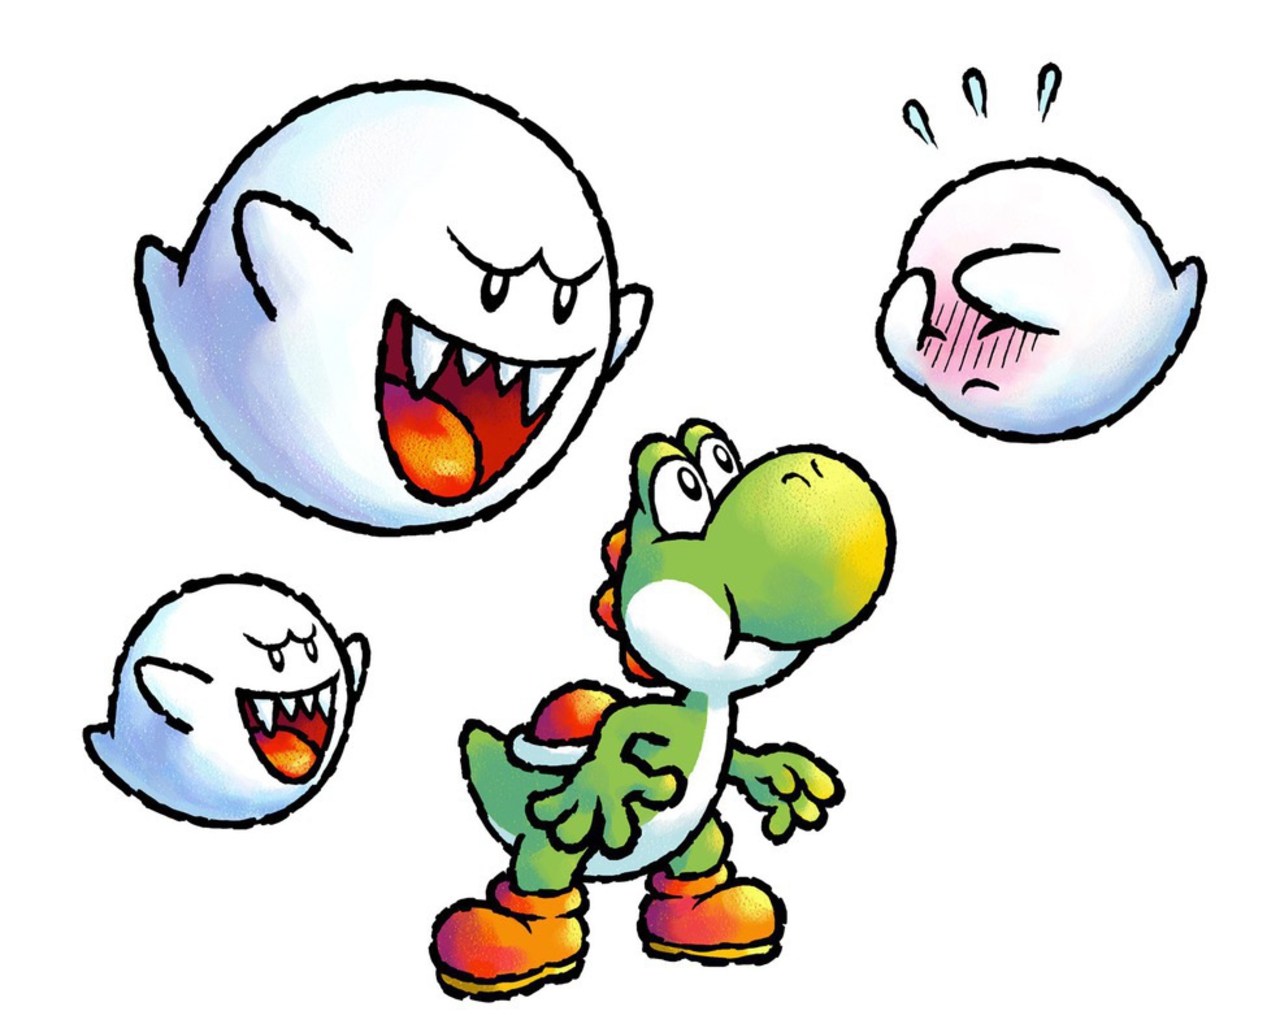 Yoshi Topsy-Turvy Picture